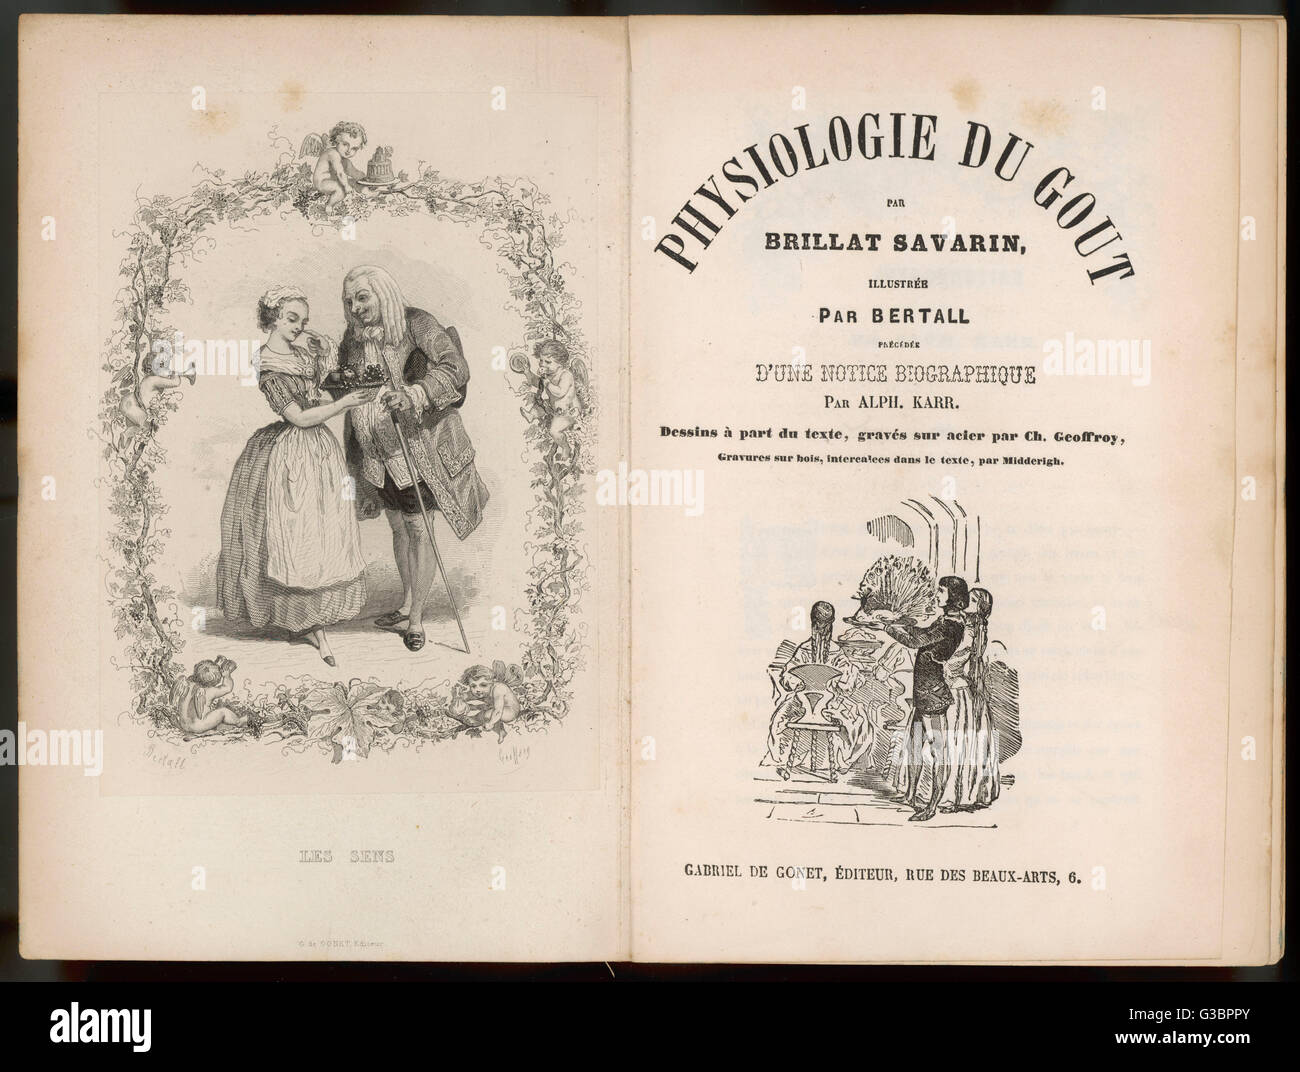 Frontispiece and title page of  'Physiology of Taste' by  Brillat Savarin. A book about  gastronomy dedicated to  ' Parisian gourmets '      Date: First published: 1825 Stock Photo